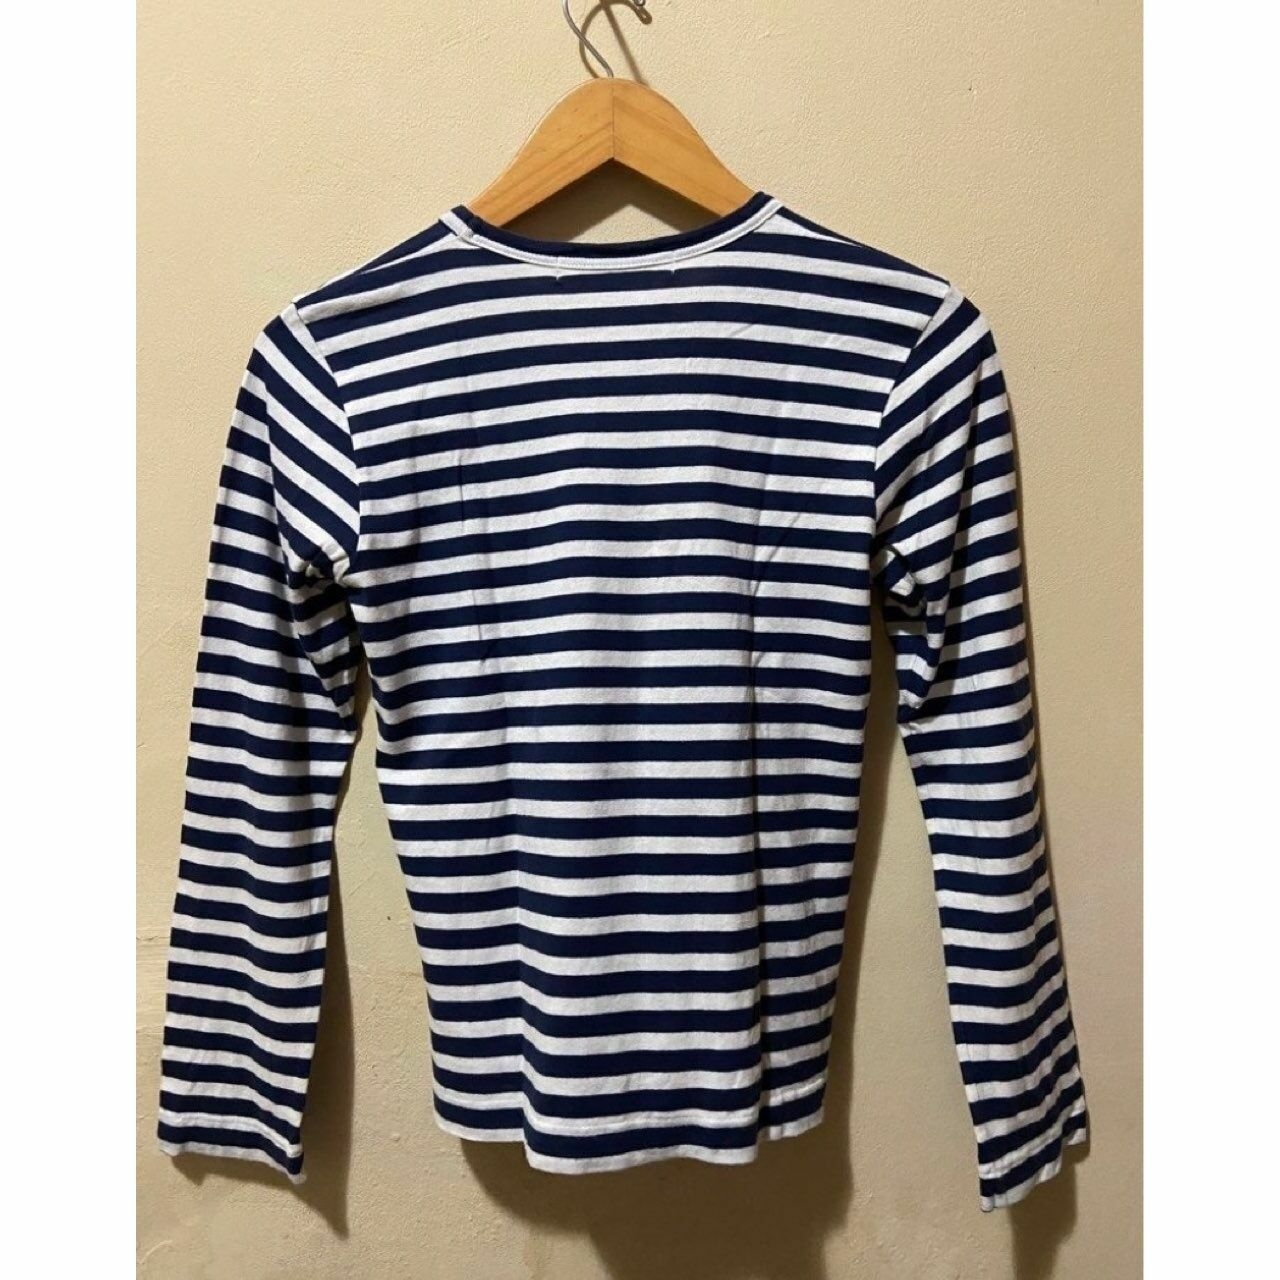 Play by Comme des Garcons Navy & White Stripes Long Sleeve Tshirt